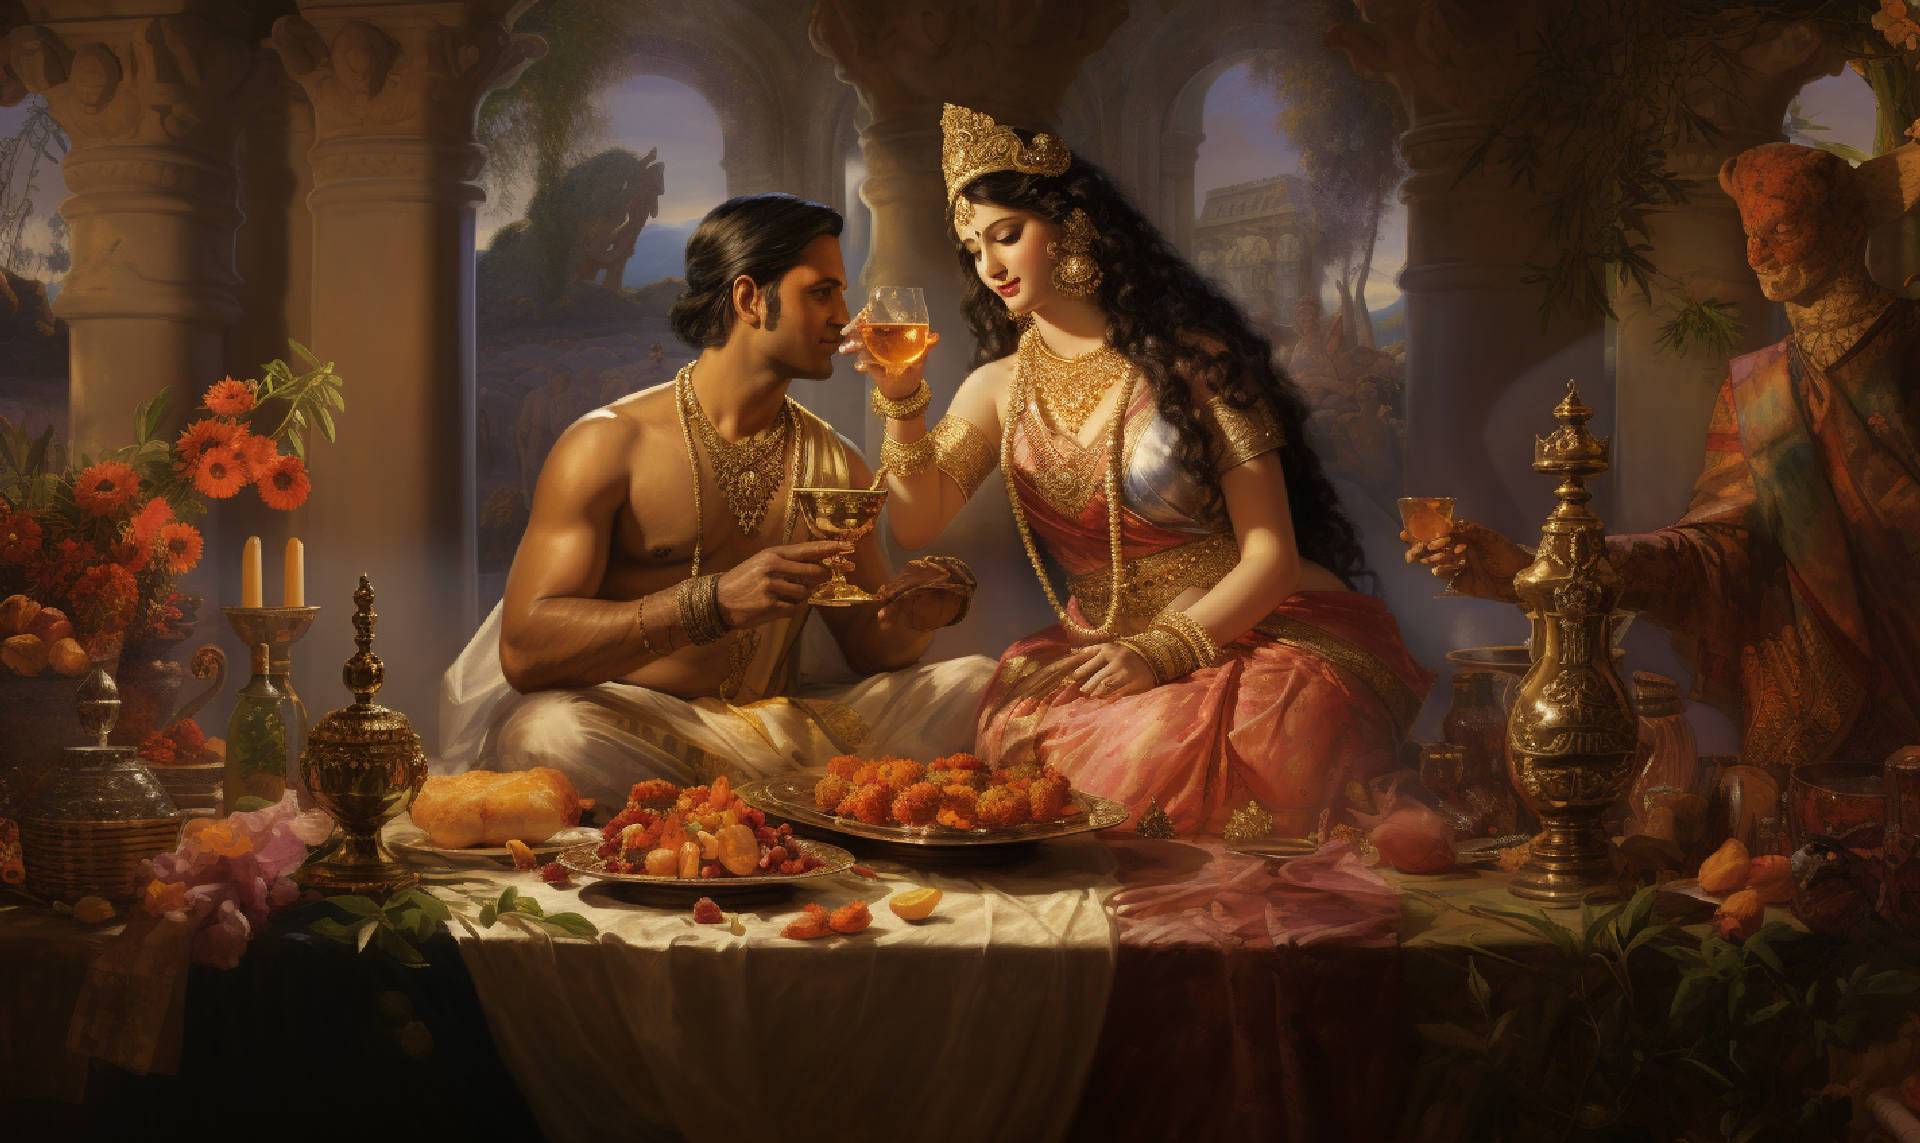 An artistic depiction of wine being used in a Hindu ritual, illustrating the symbolic and cultural significance of wine in Hinduism.